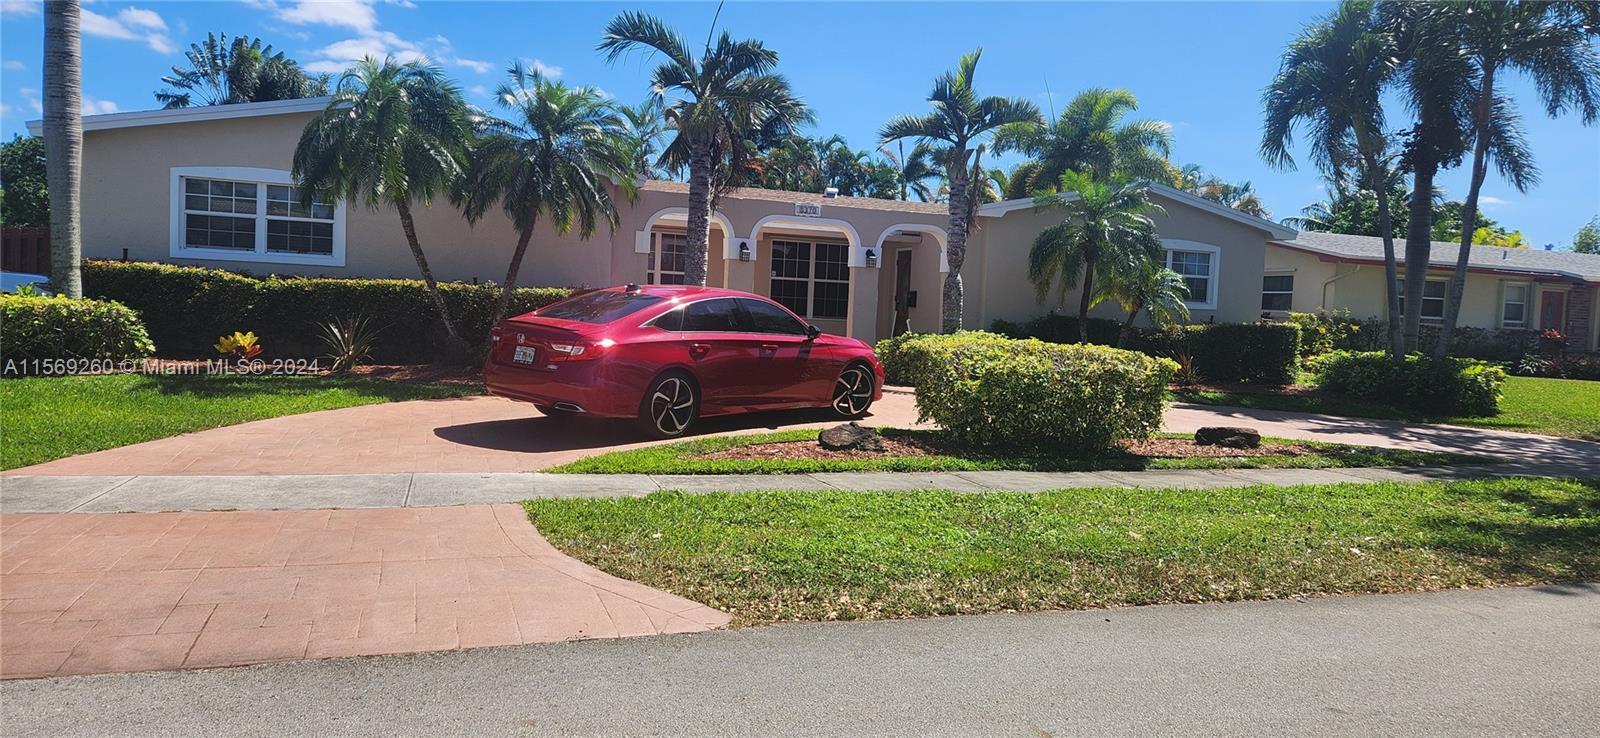 Photo of 8370 NW 24th Ct in Pembroke Pines, FL